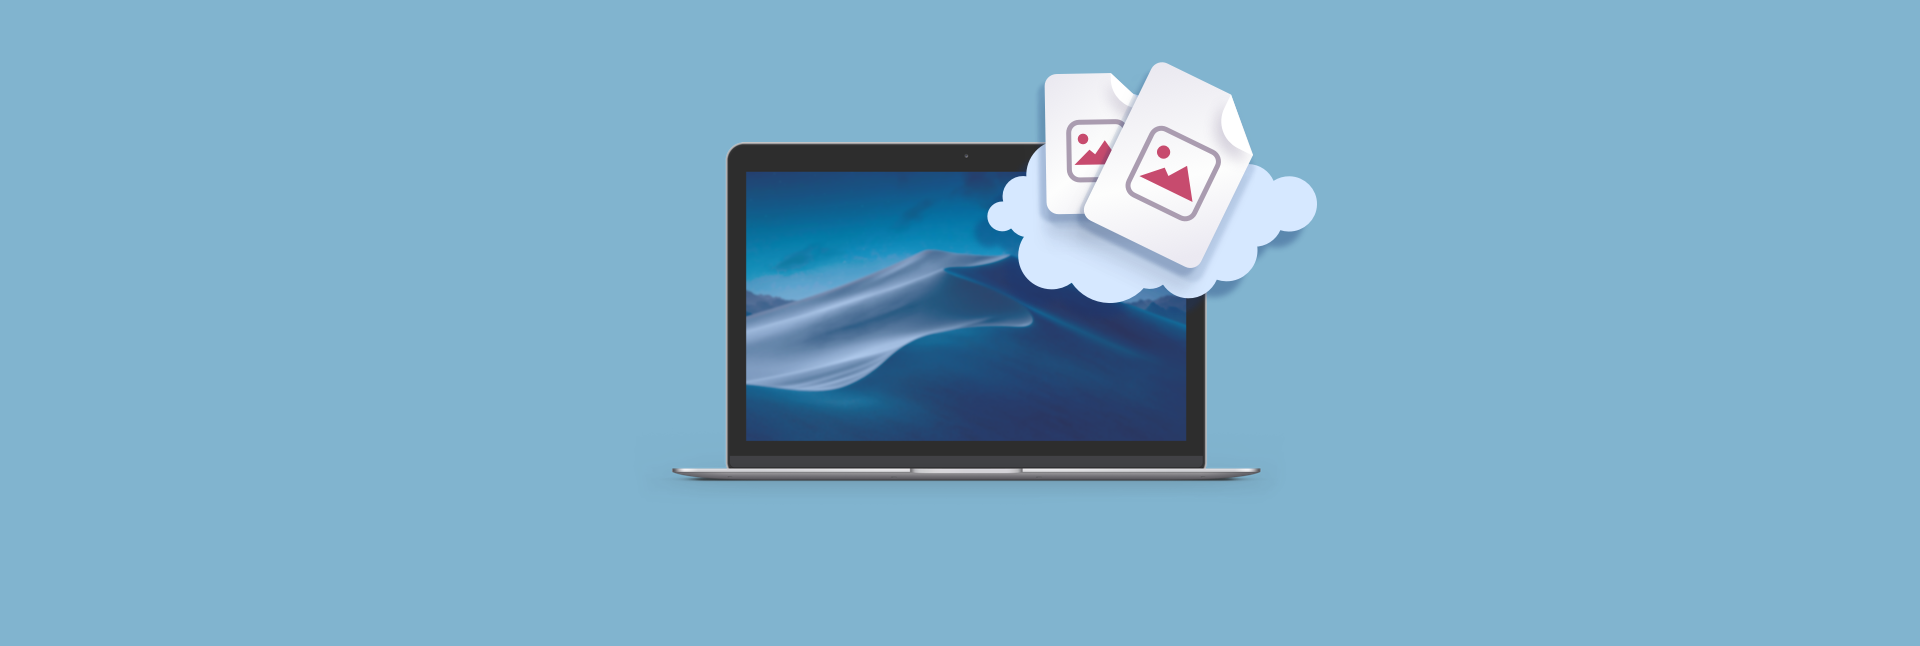 how to backup iphoto to icloud